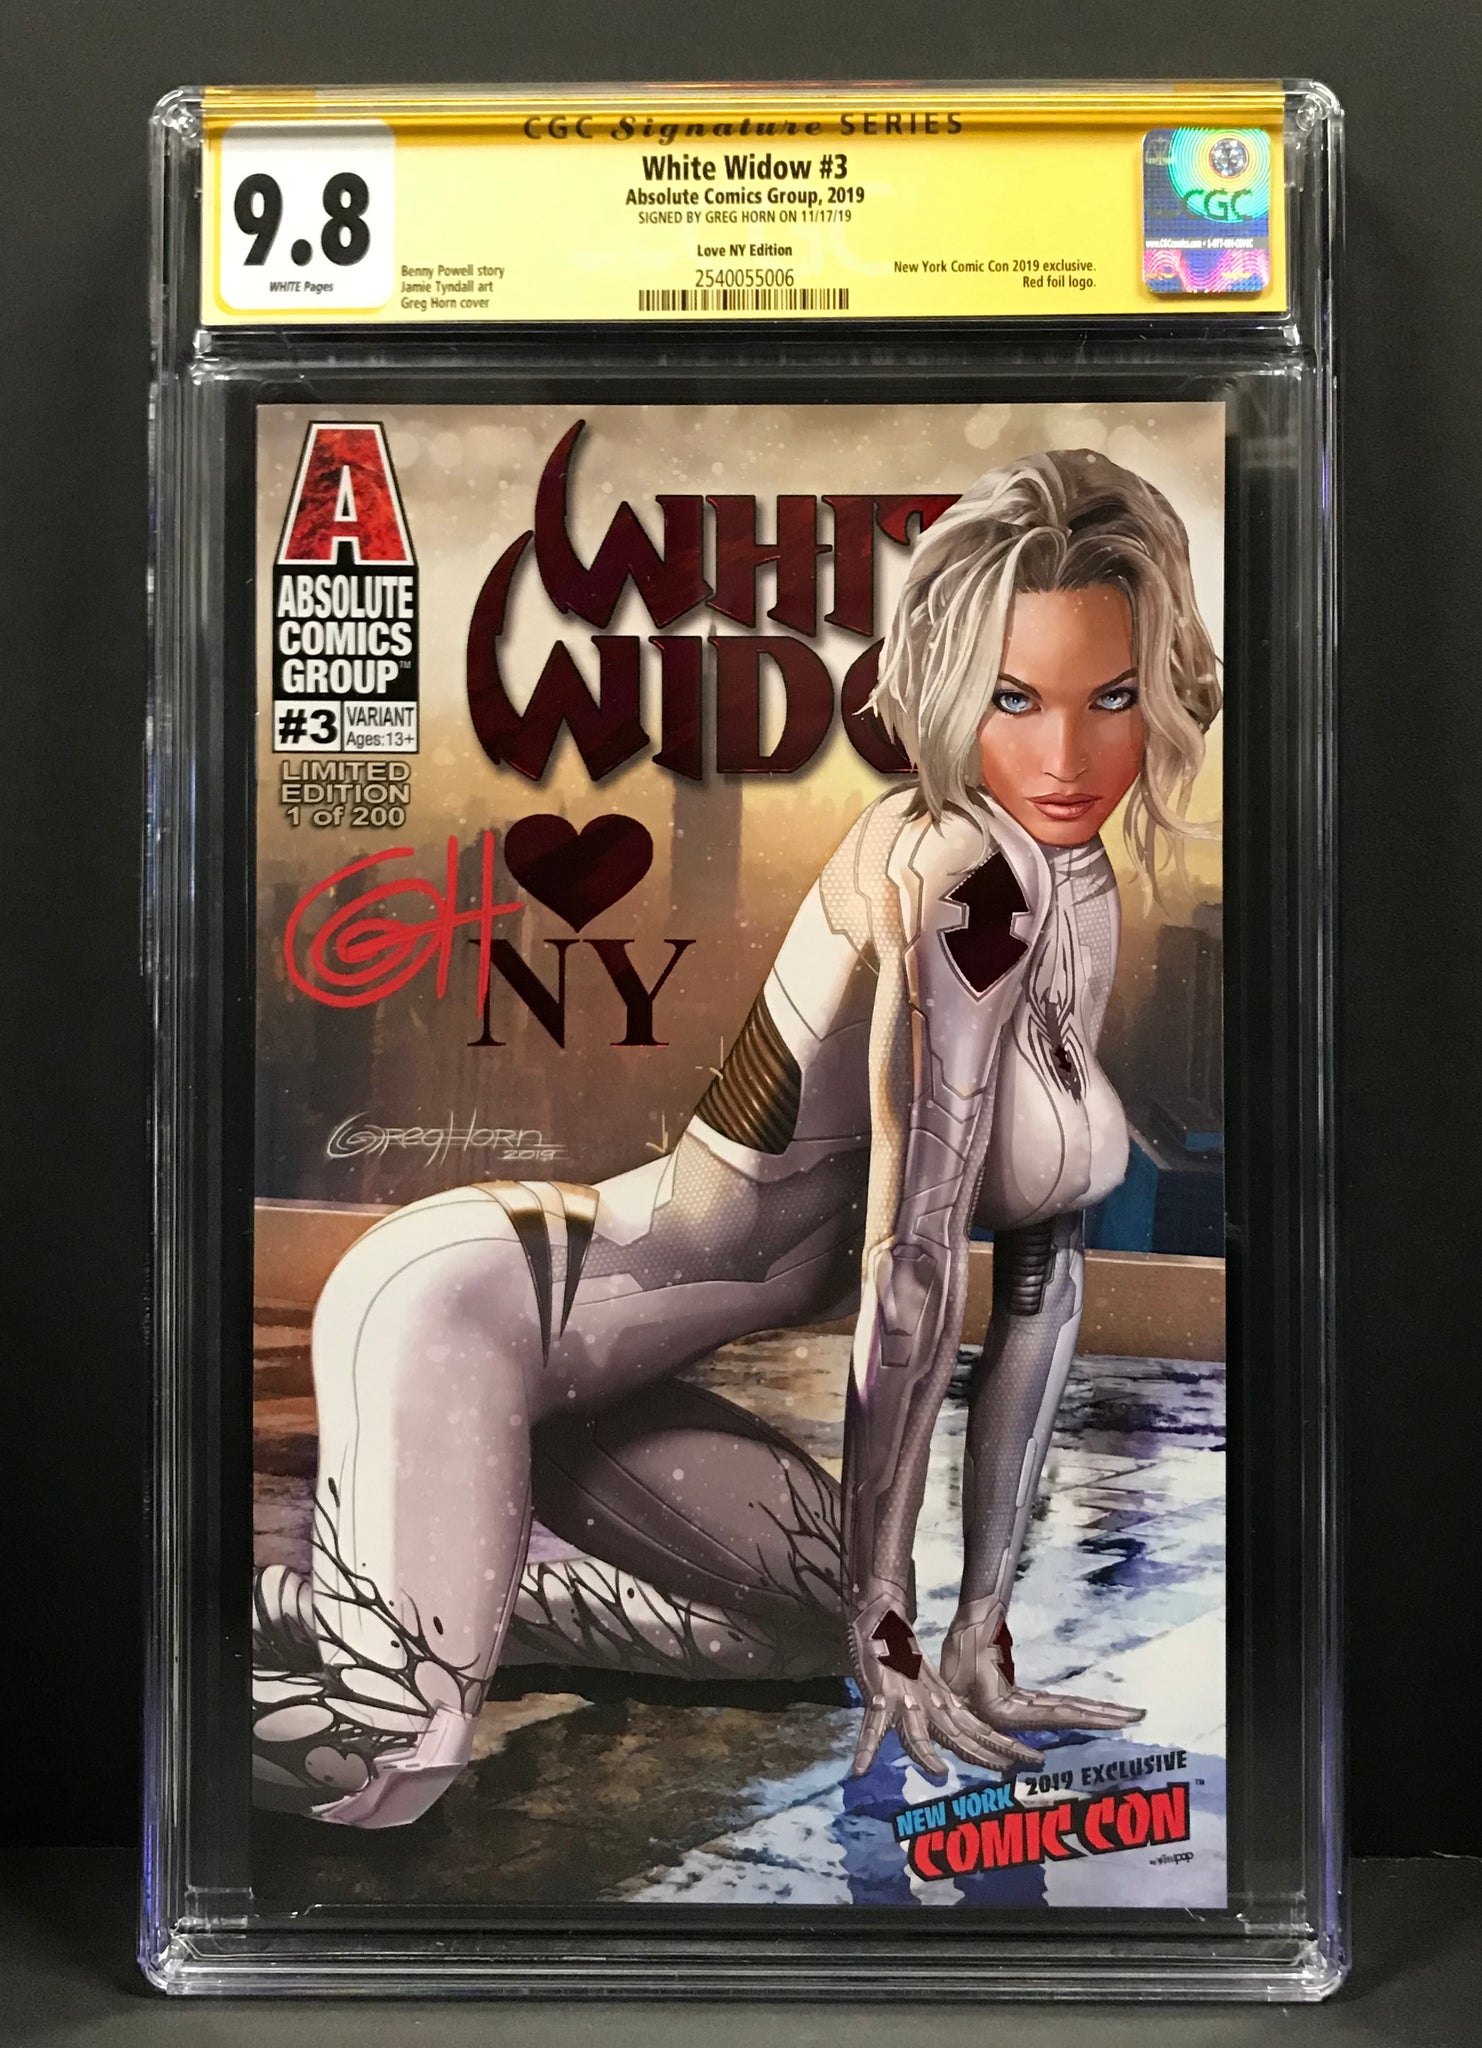 White WIdow # 3 Knowhere Toys Convention Exclusives/Greg Horn Art NYCC Trade Variant CGC